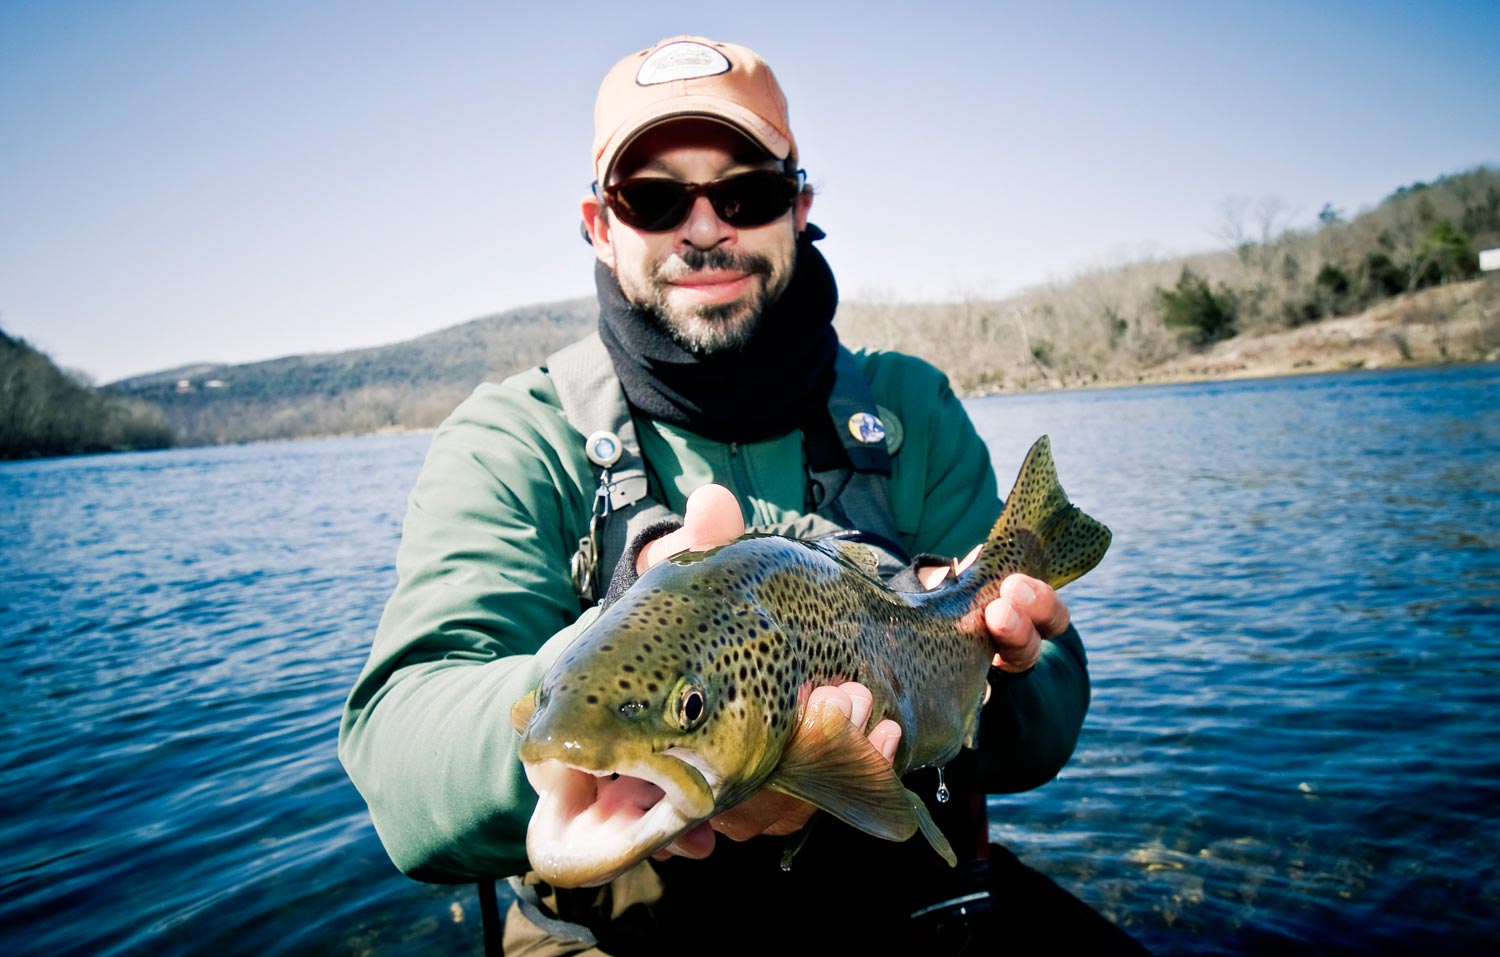 Fly Fishing Gear - Fly Fishing, Gink and Gasoline